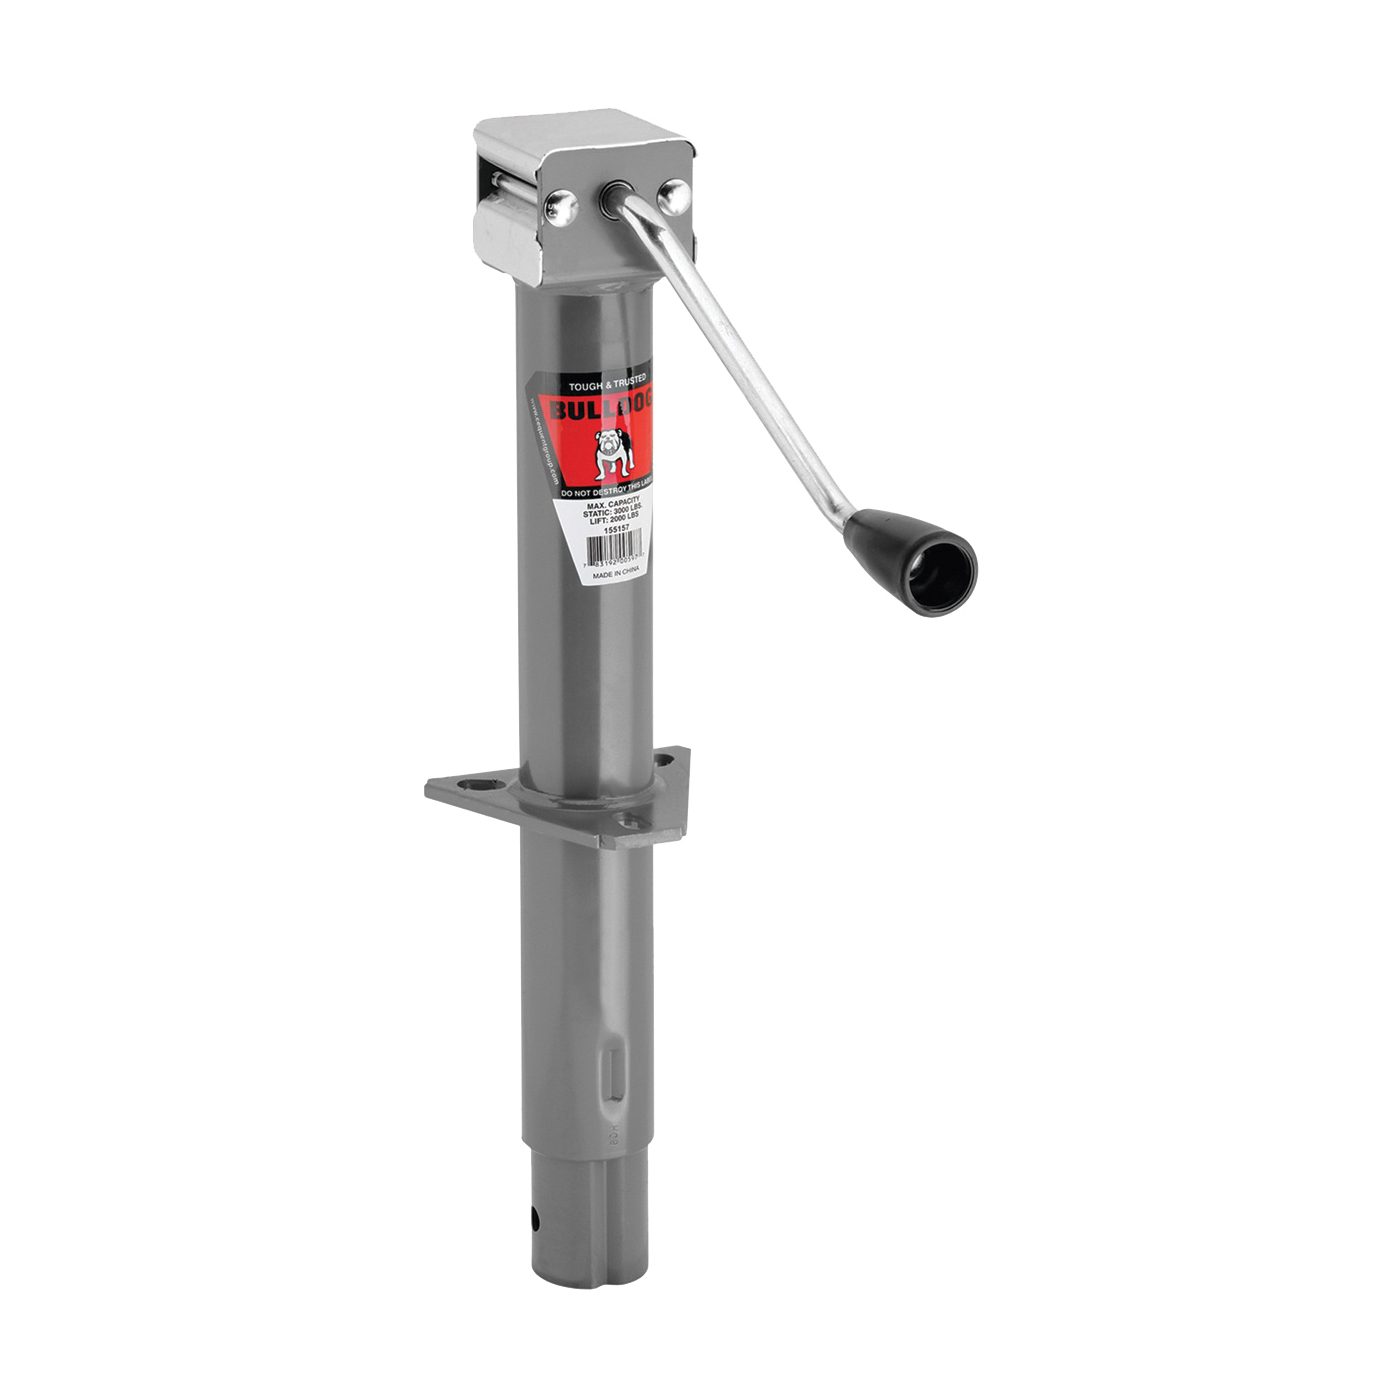 155157 Trailer Jack, 2000 lb Lifting, 1 ft 9-1/2 in Max Lift H, 34.6 in OAH, Steel